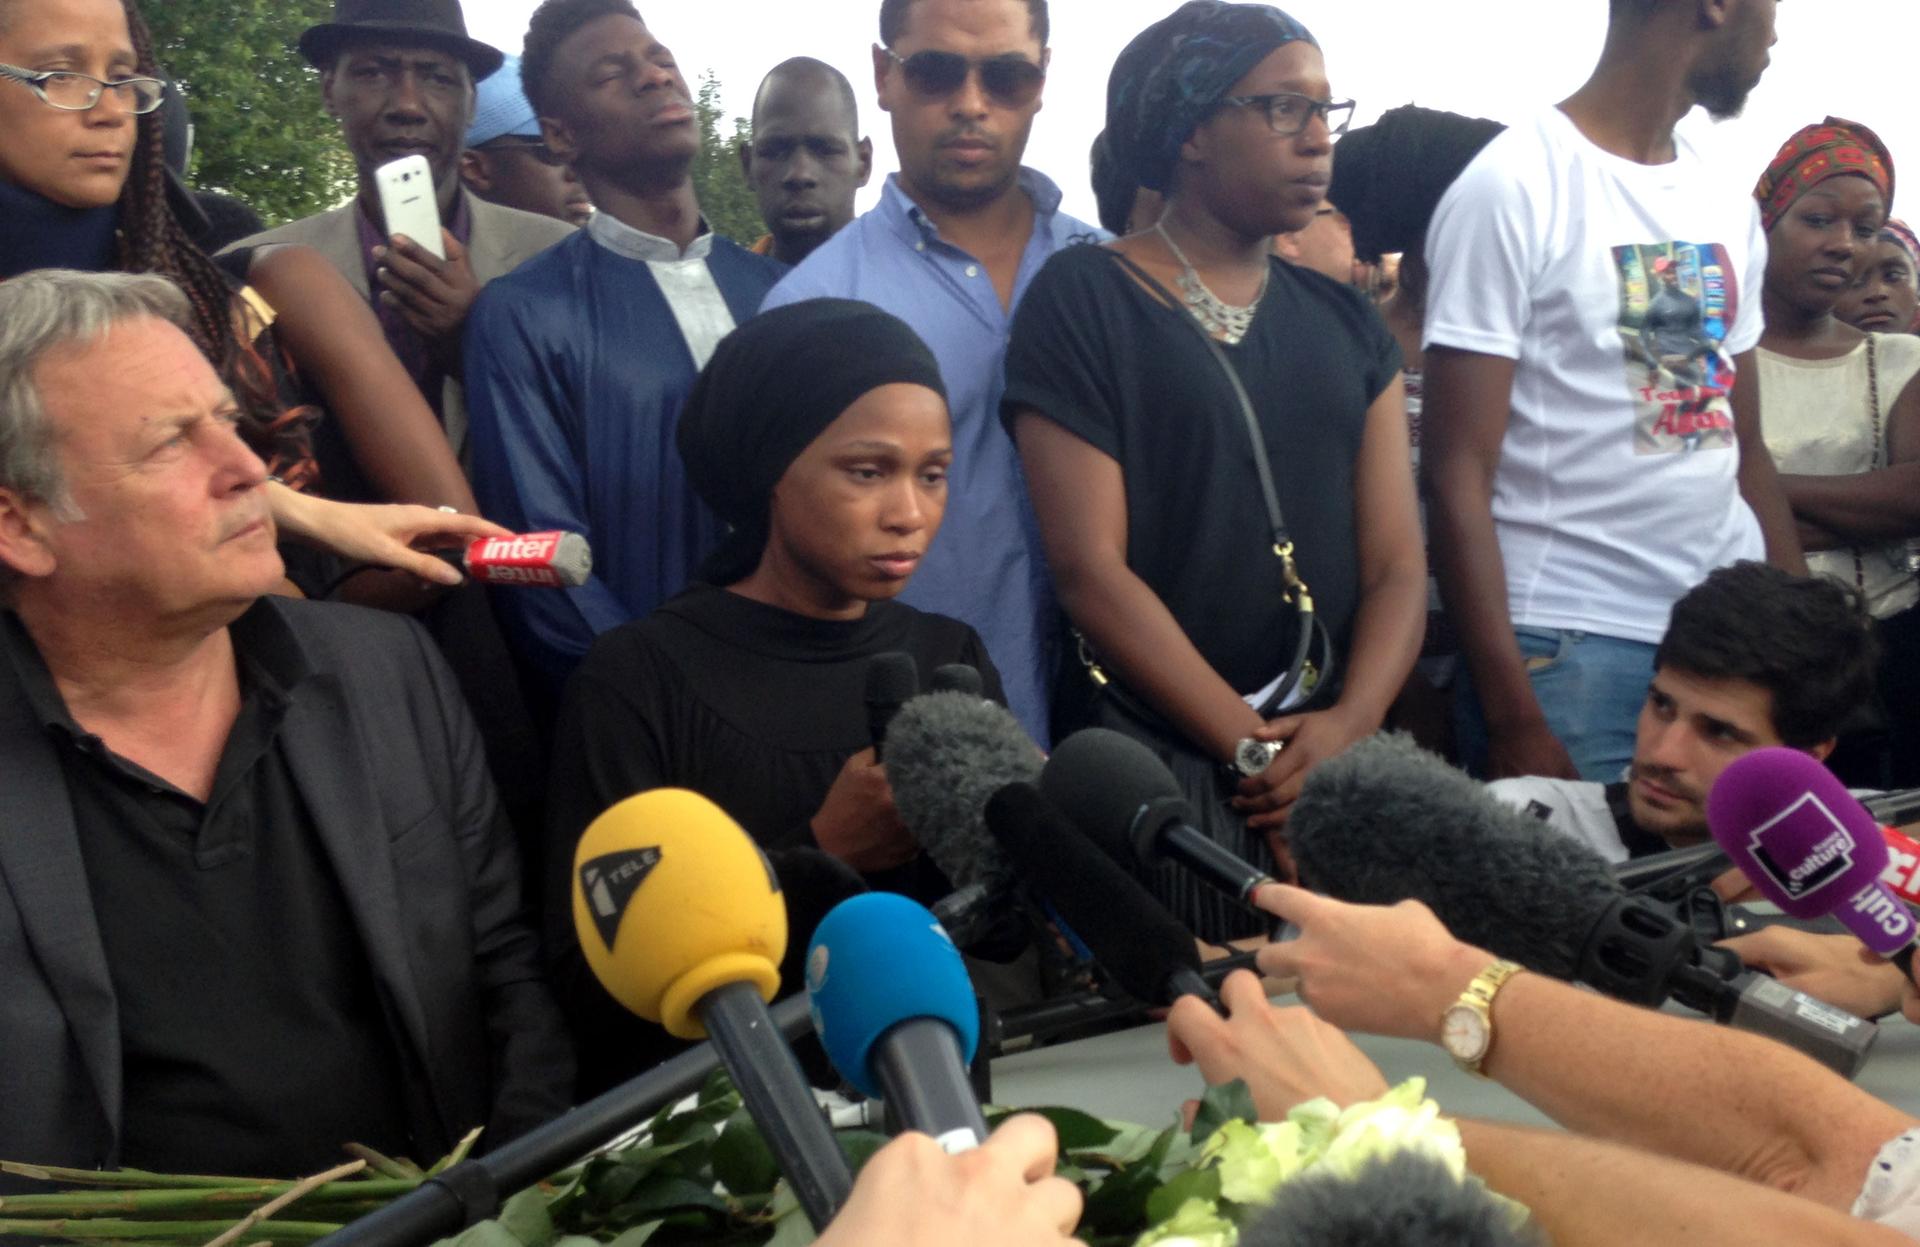 Assa Traoré and the family's lawyer Frédéric Zajac, spoke to the press and supporters three days after the death of her brother, Adama Traoré, in police custody.